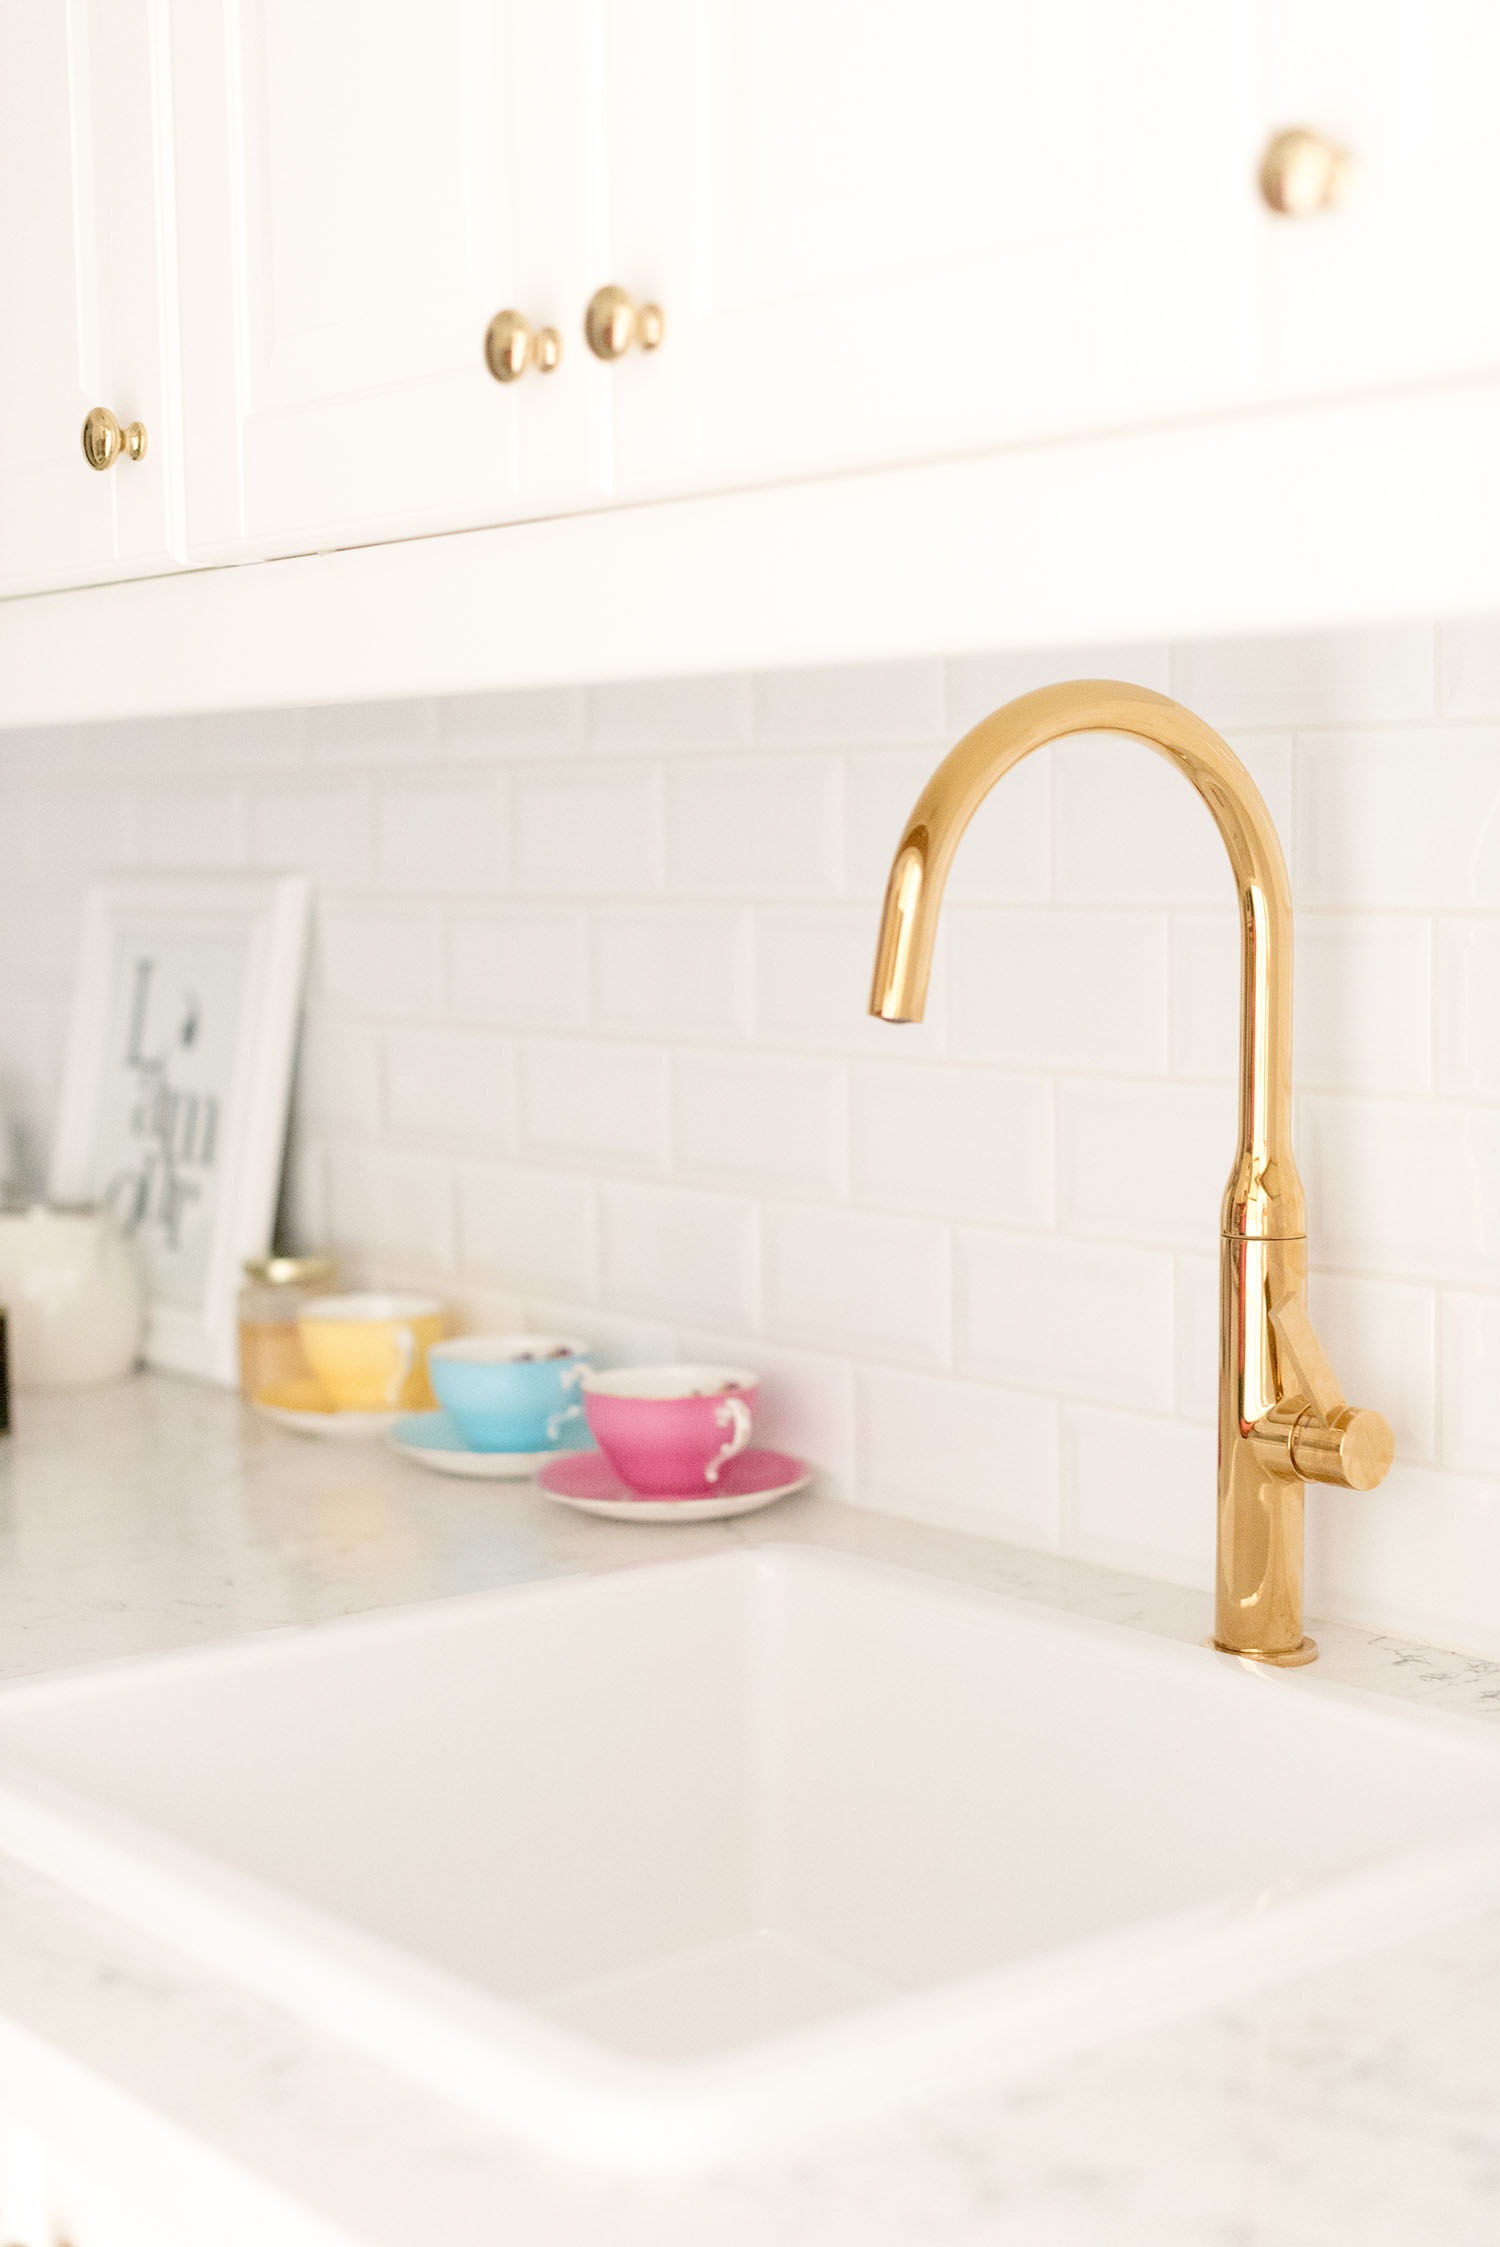 Details of the white skin and gold faucet in Cee Fardoe of Coco & Vera's Winnipeg kitchen